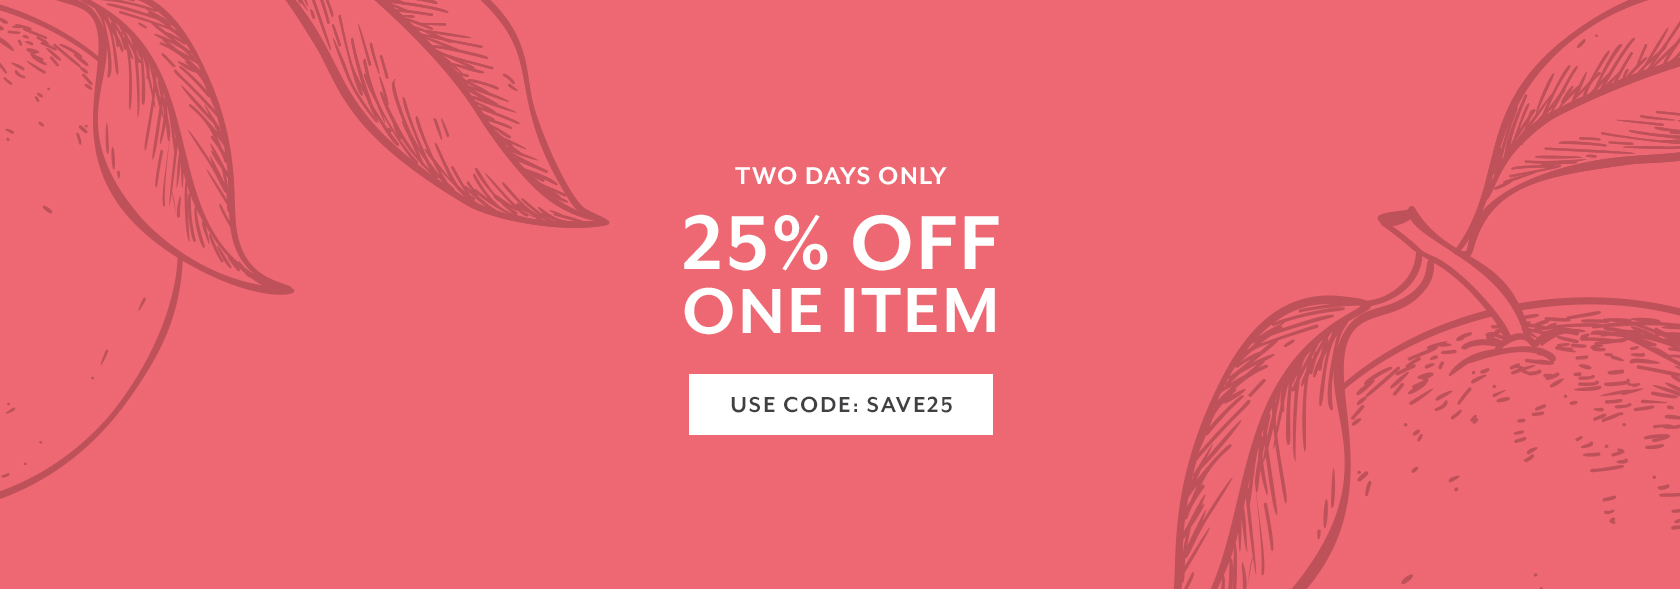 Two days only 25% off one item, use code SAVE25.